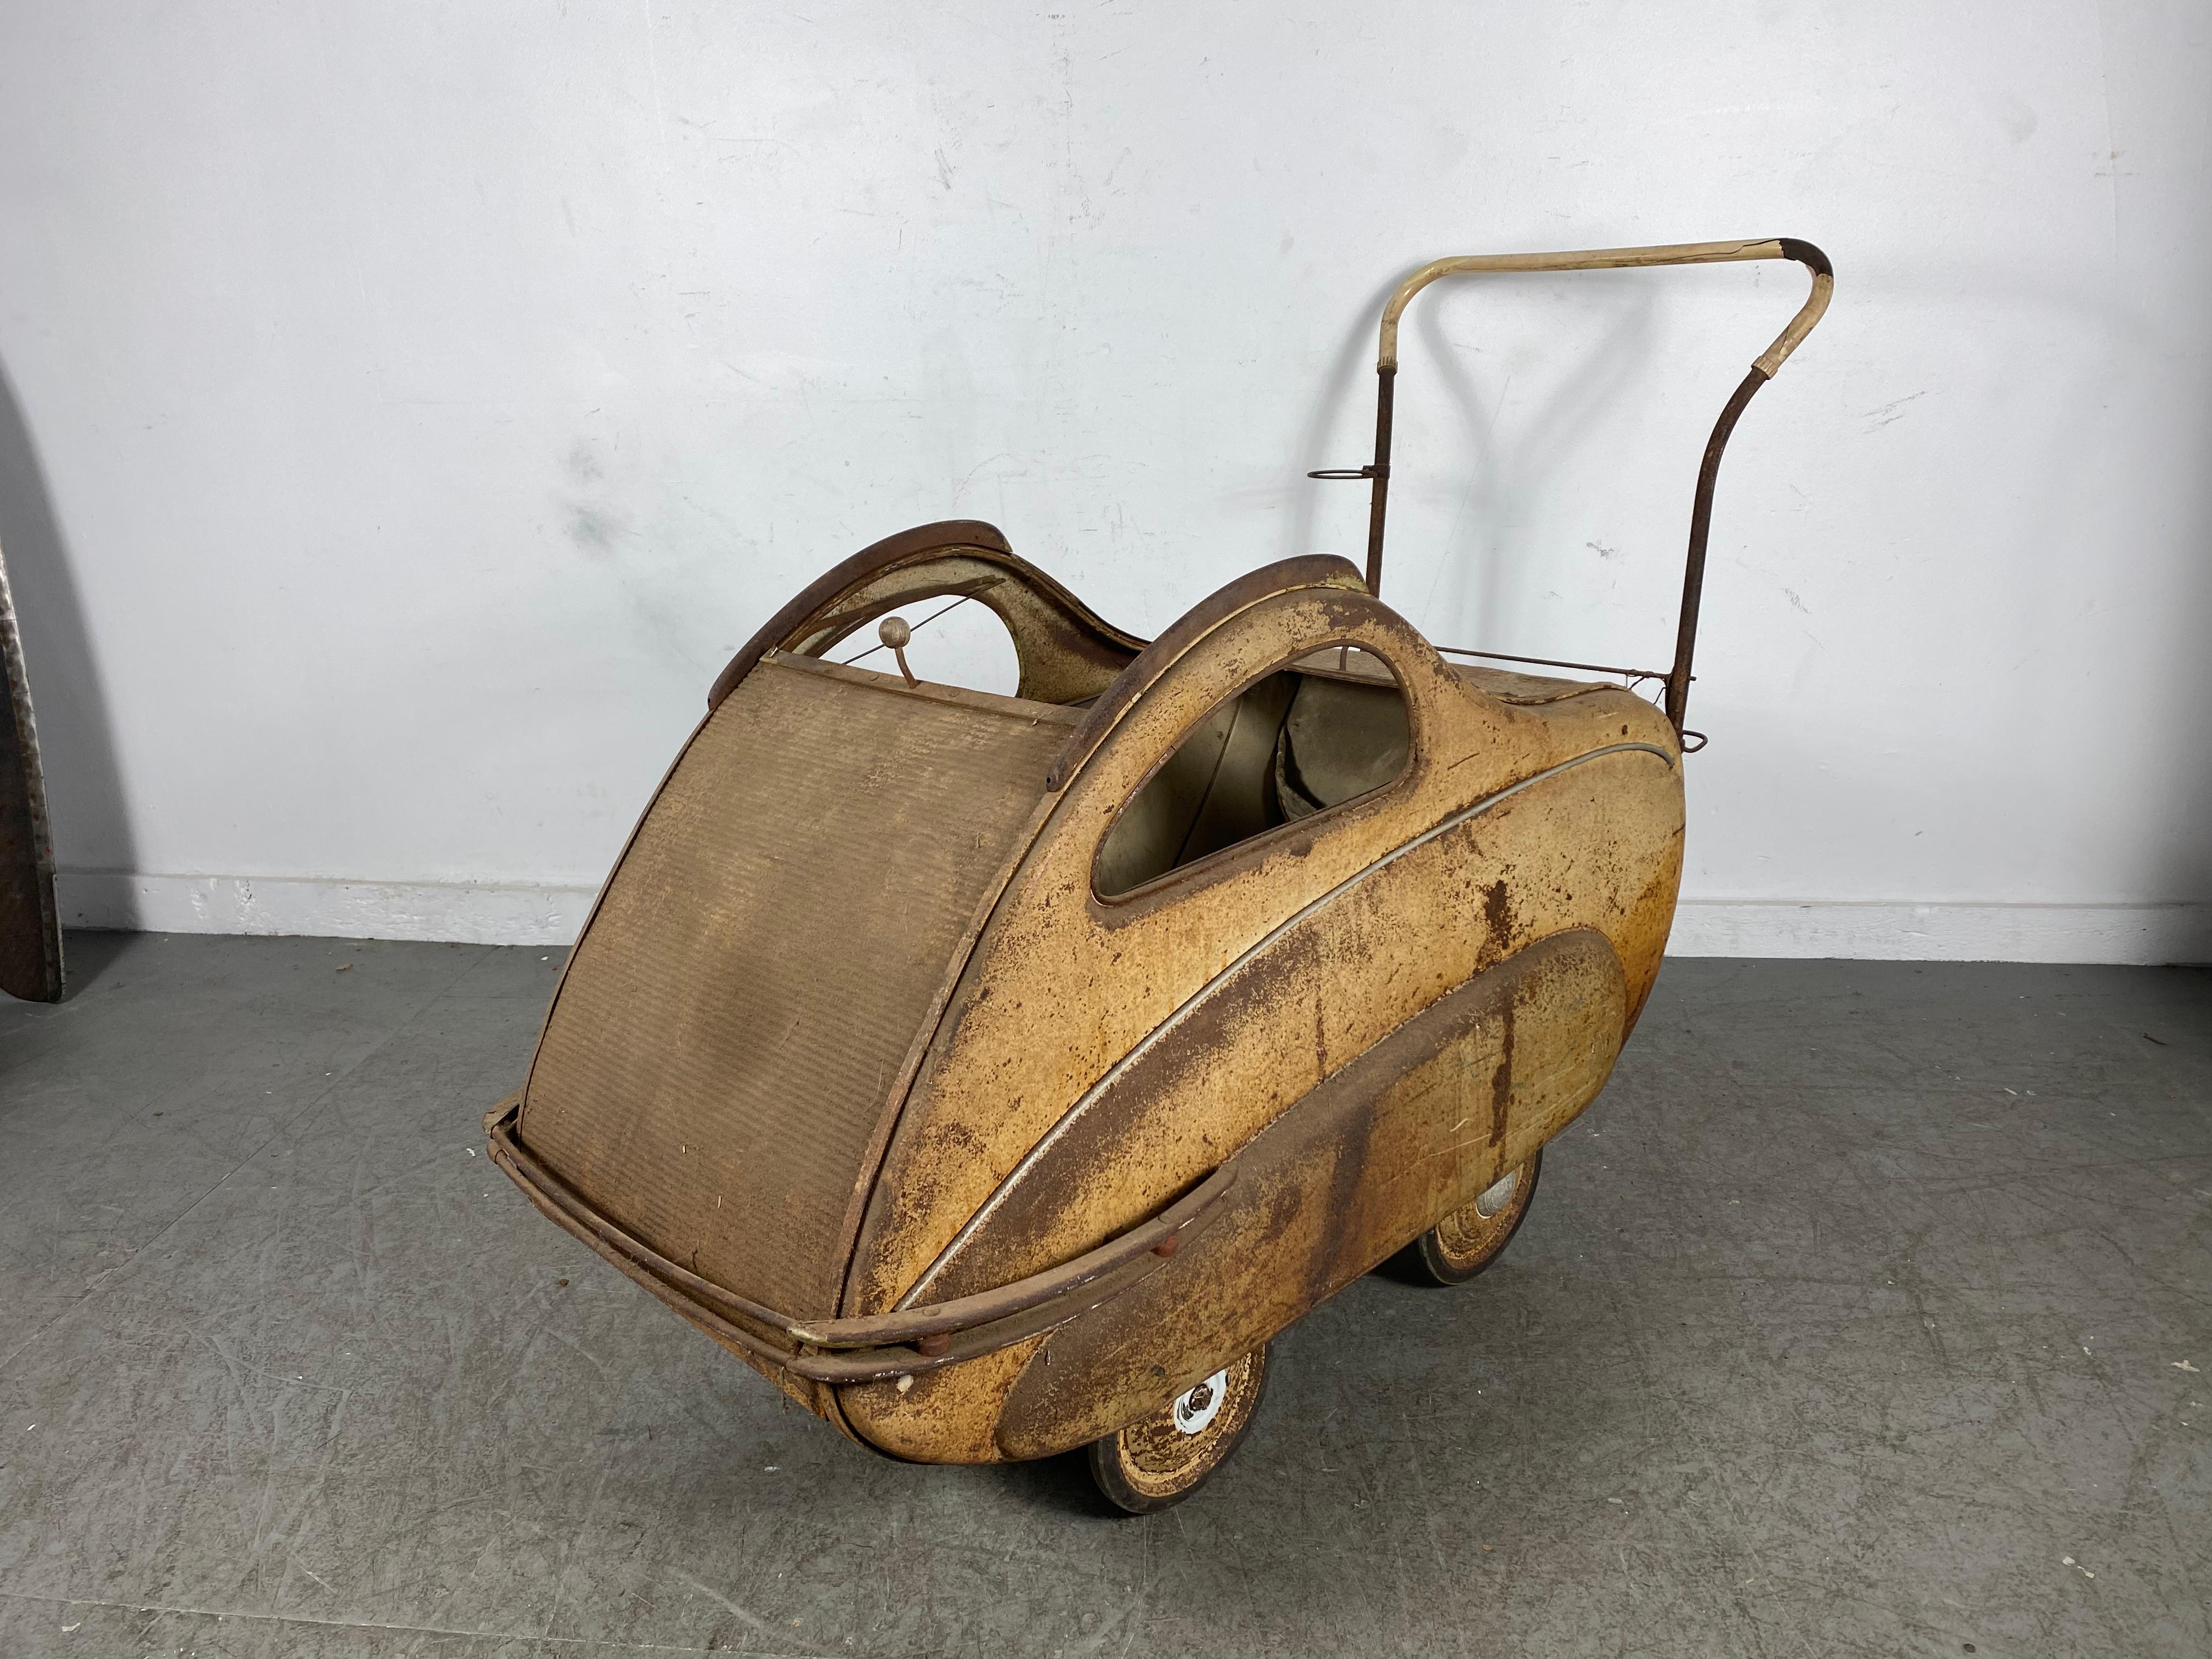 Rare 1930s Futuristic, Deco, streamline Baby Buggy / Stroller/ Perambulator PRAM... This is definitely one you wont see everyday,, Amazing design,SCULPTURE,, Retains original finish,,color,,surface ..patina..Tambour sliding panels (top) All